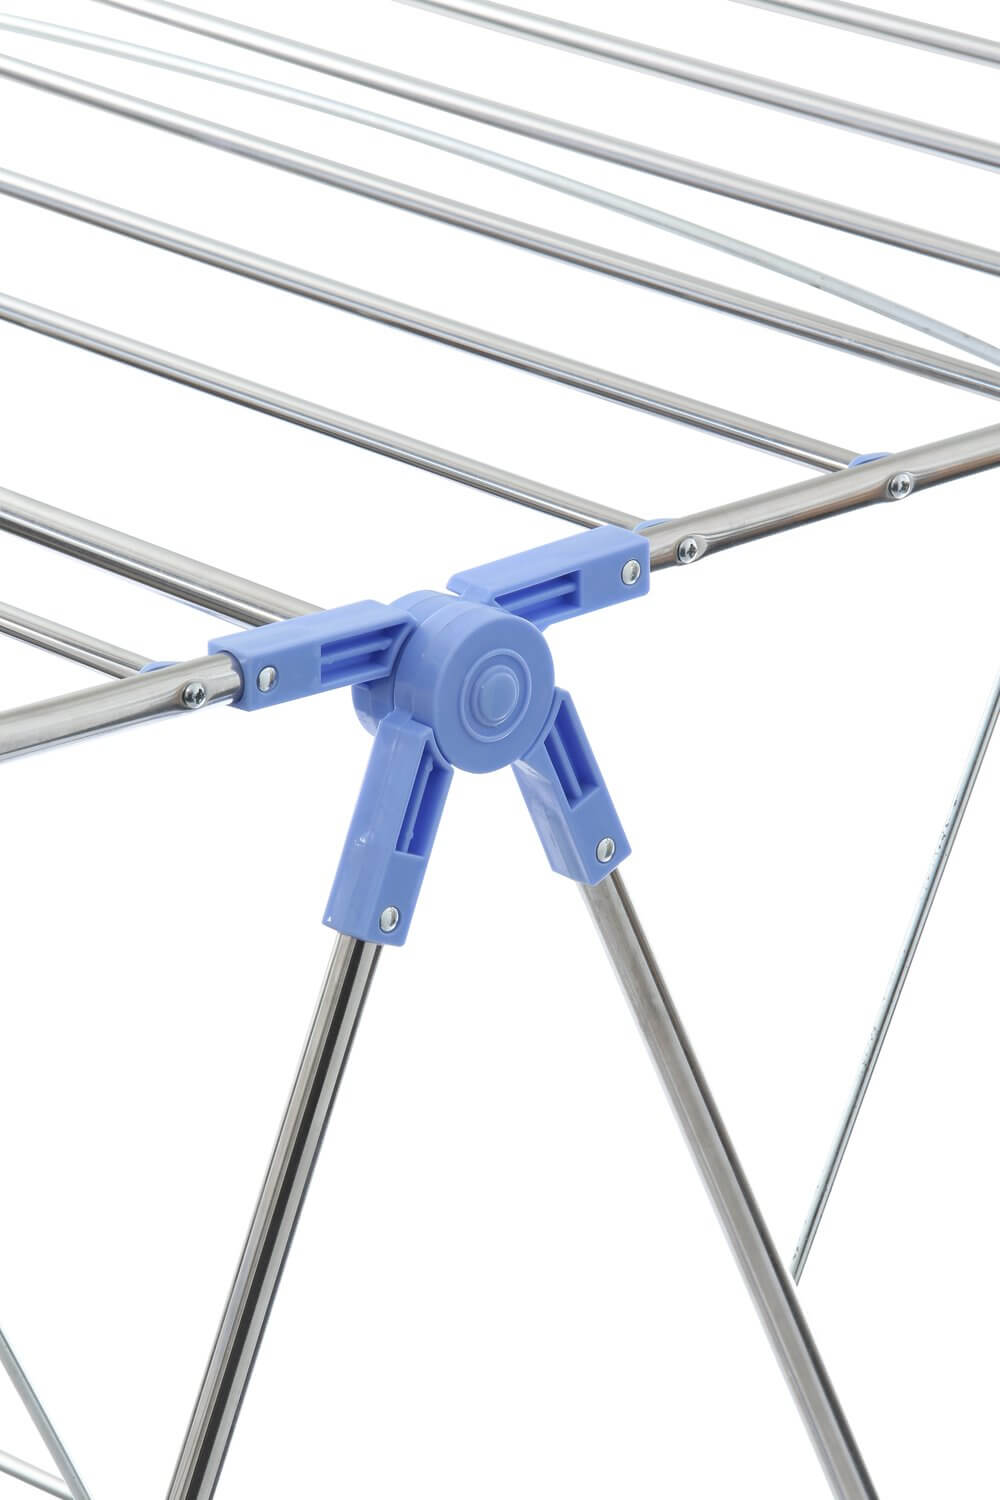 Wide 28 Rail Stainless Steel A-Frame Clothes Airer &amp; Bonus Hangers - LAUNDRY - Airers - Soko and Co